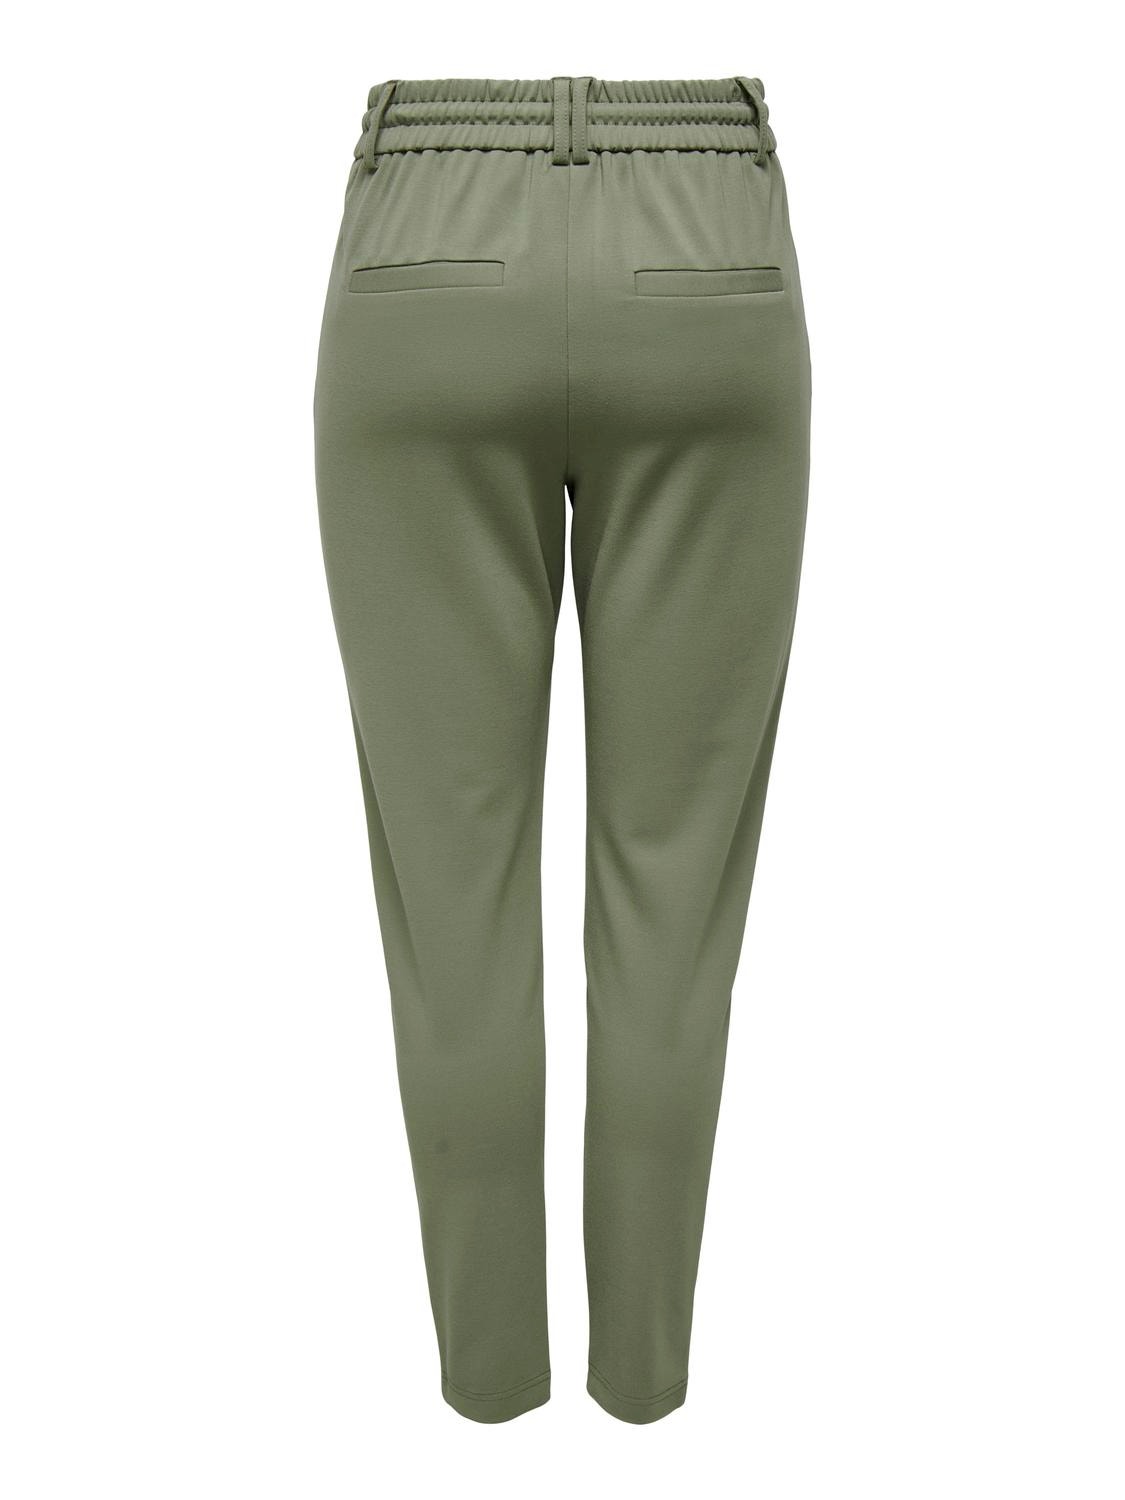 ONLY Poptrash Trousers -Deep Lichen Green - 15115847